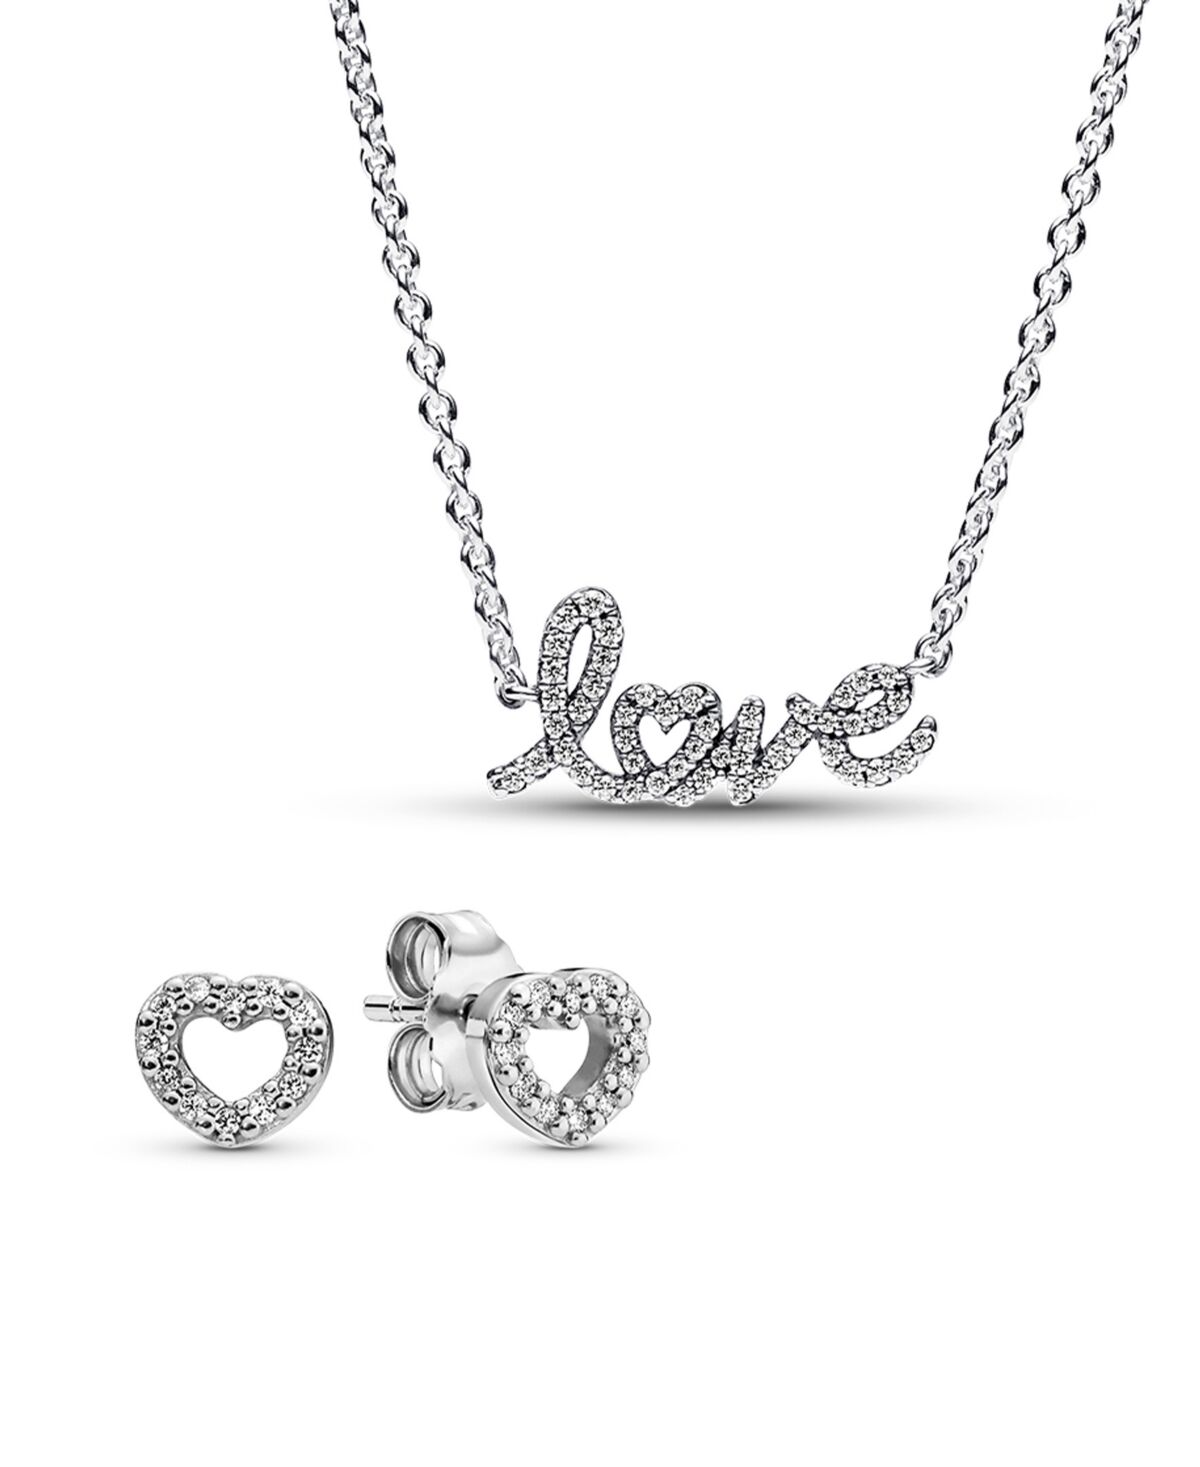 Pandora Sterling Silver Handwritten Love Necklace and Heart Shaped Studded Earrings Jewelry Gift Set - Silver